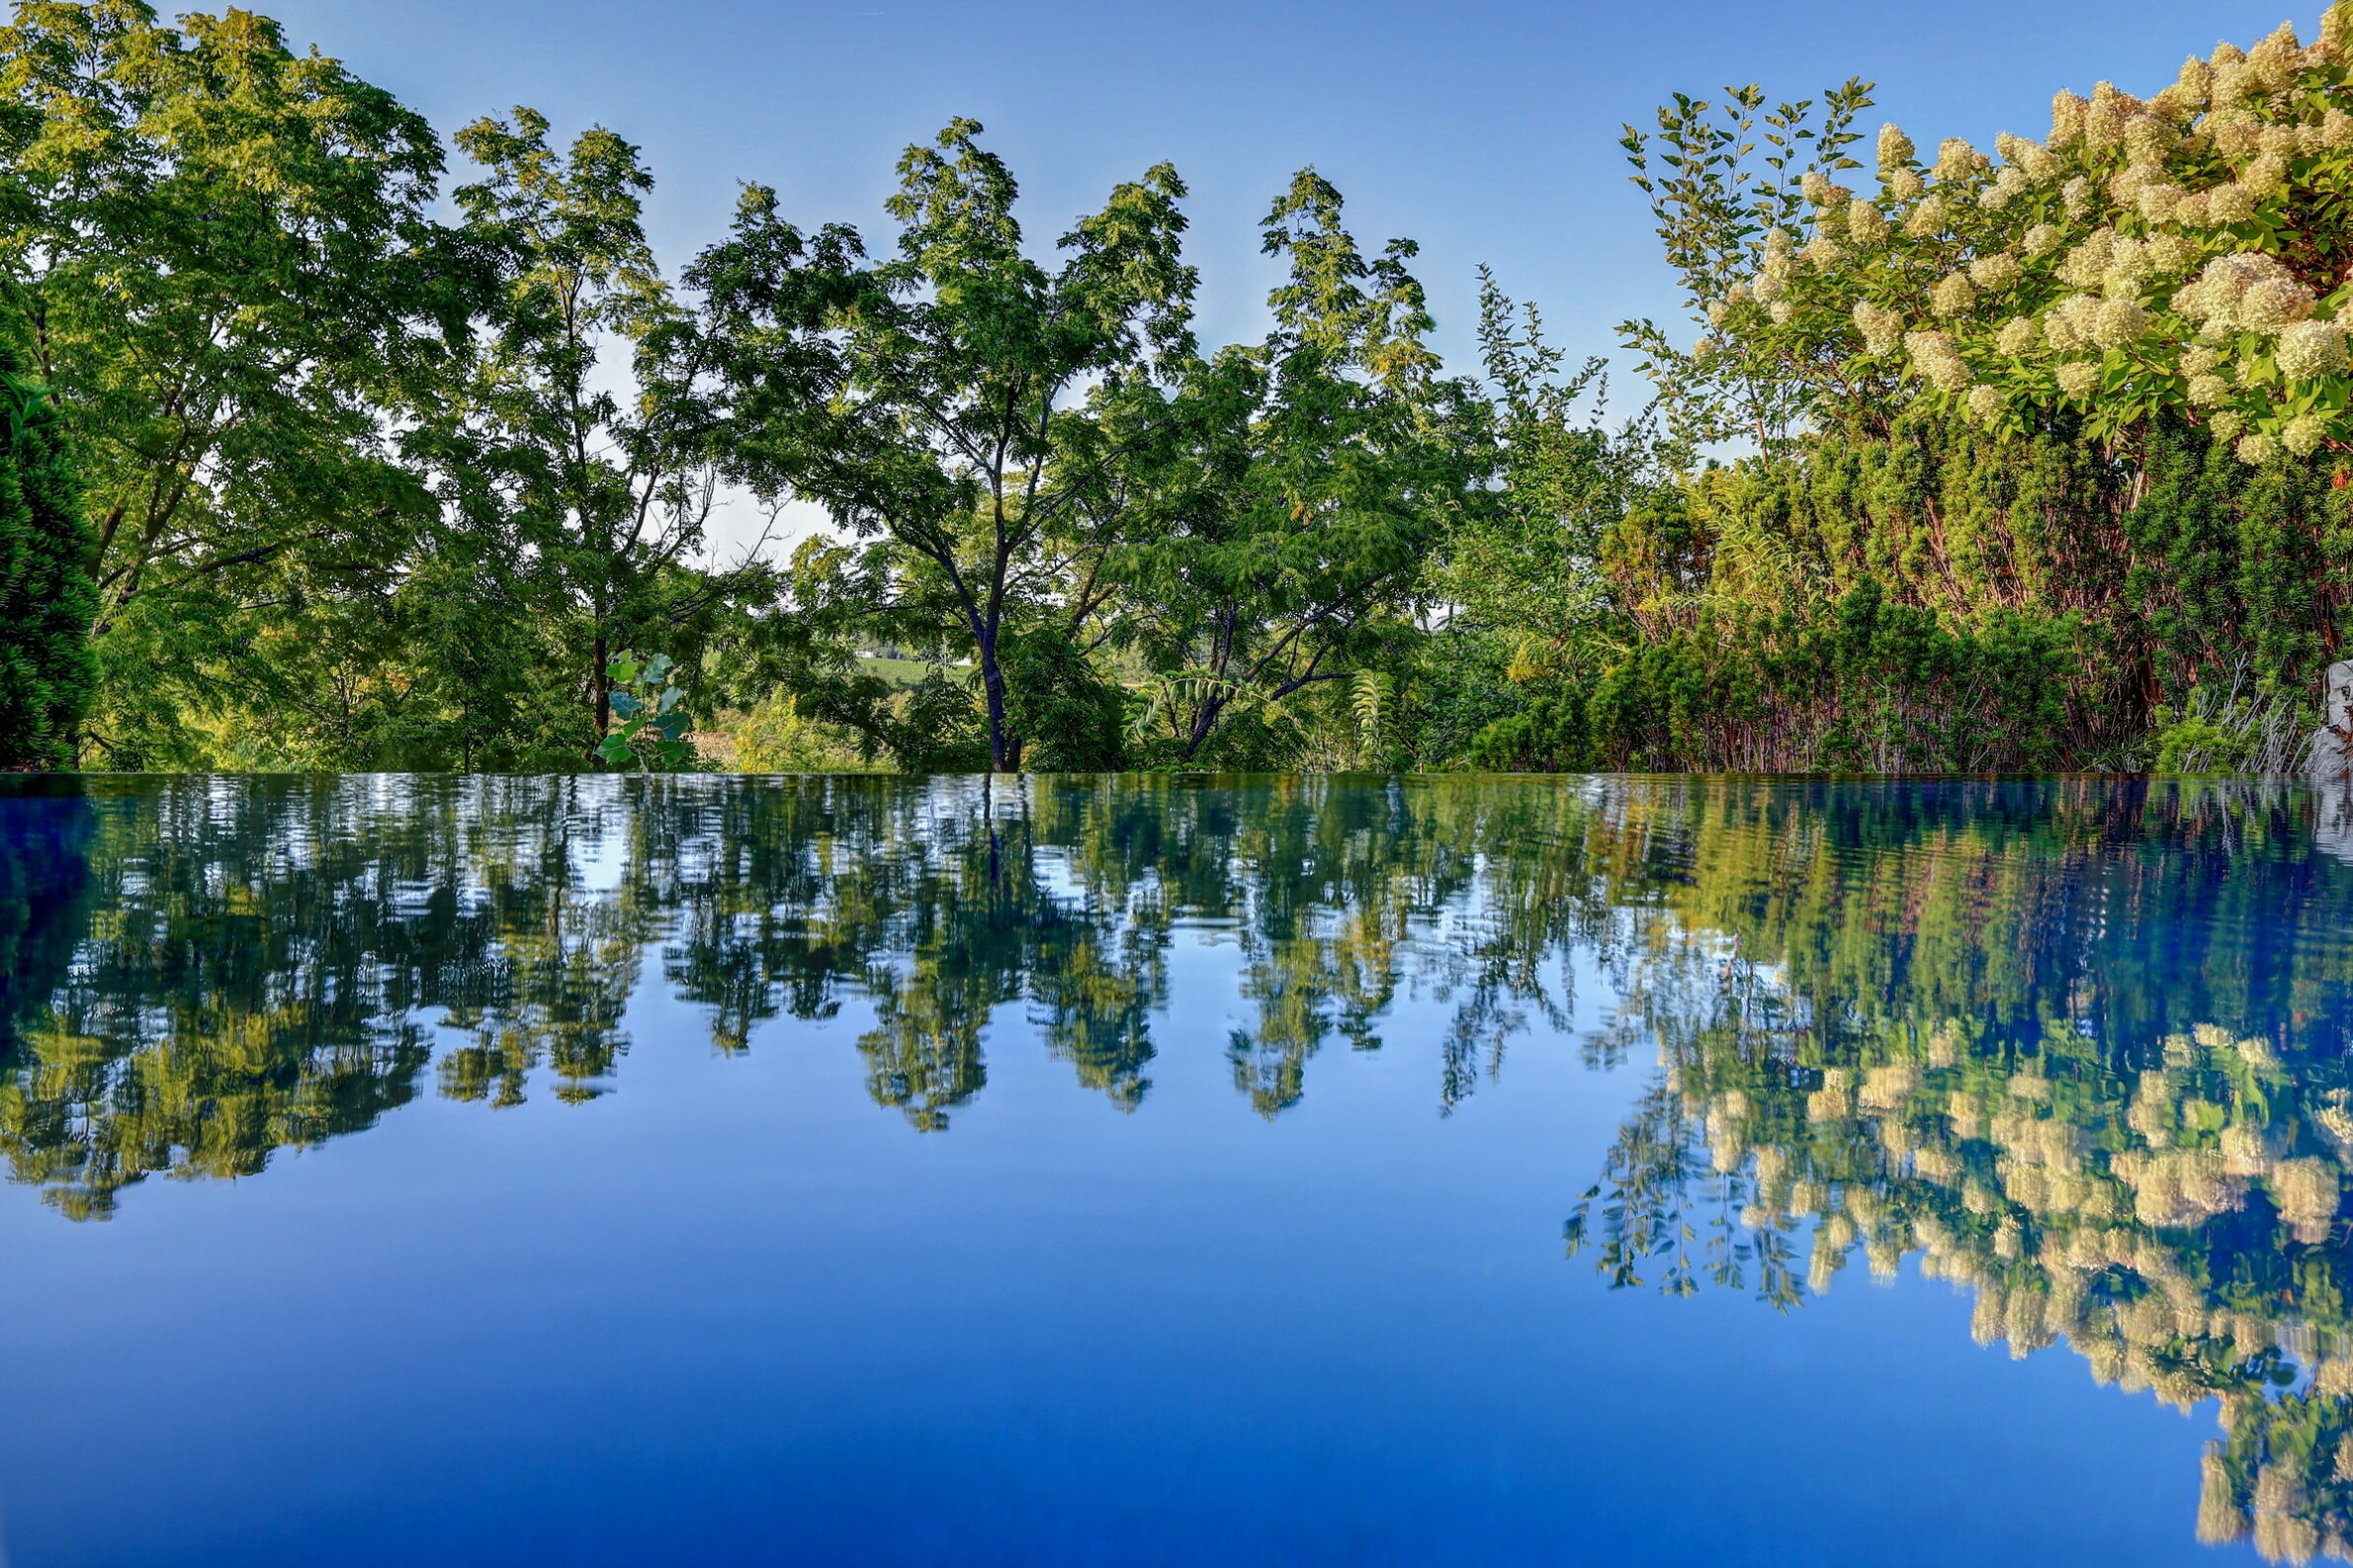 This image features a tranquil reflective pool mirroring lush green trees and flowering shrubs under a clear blue sky.